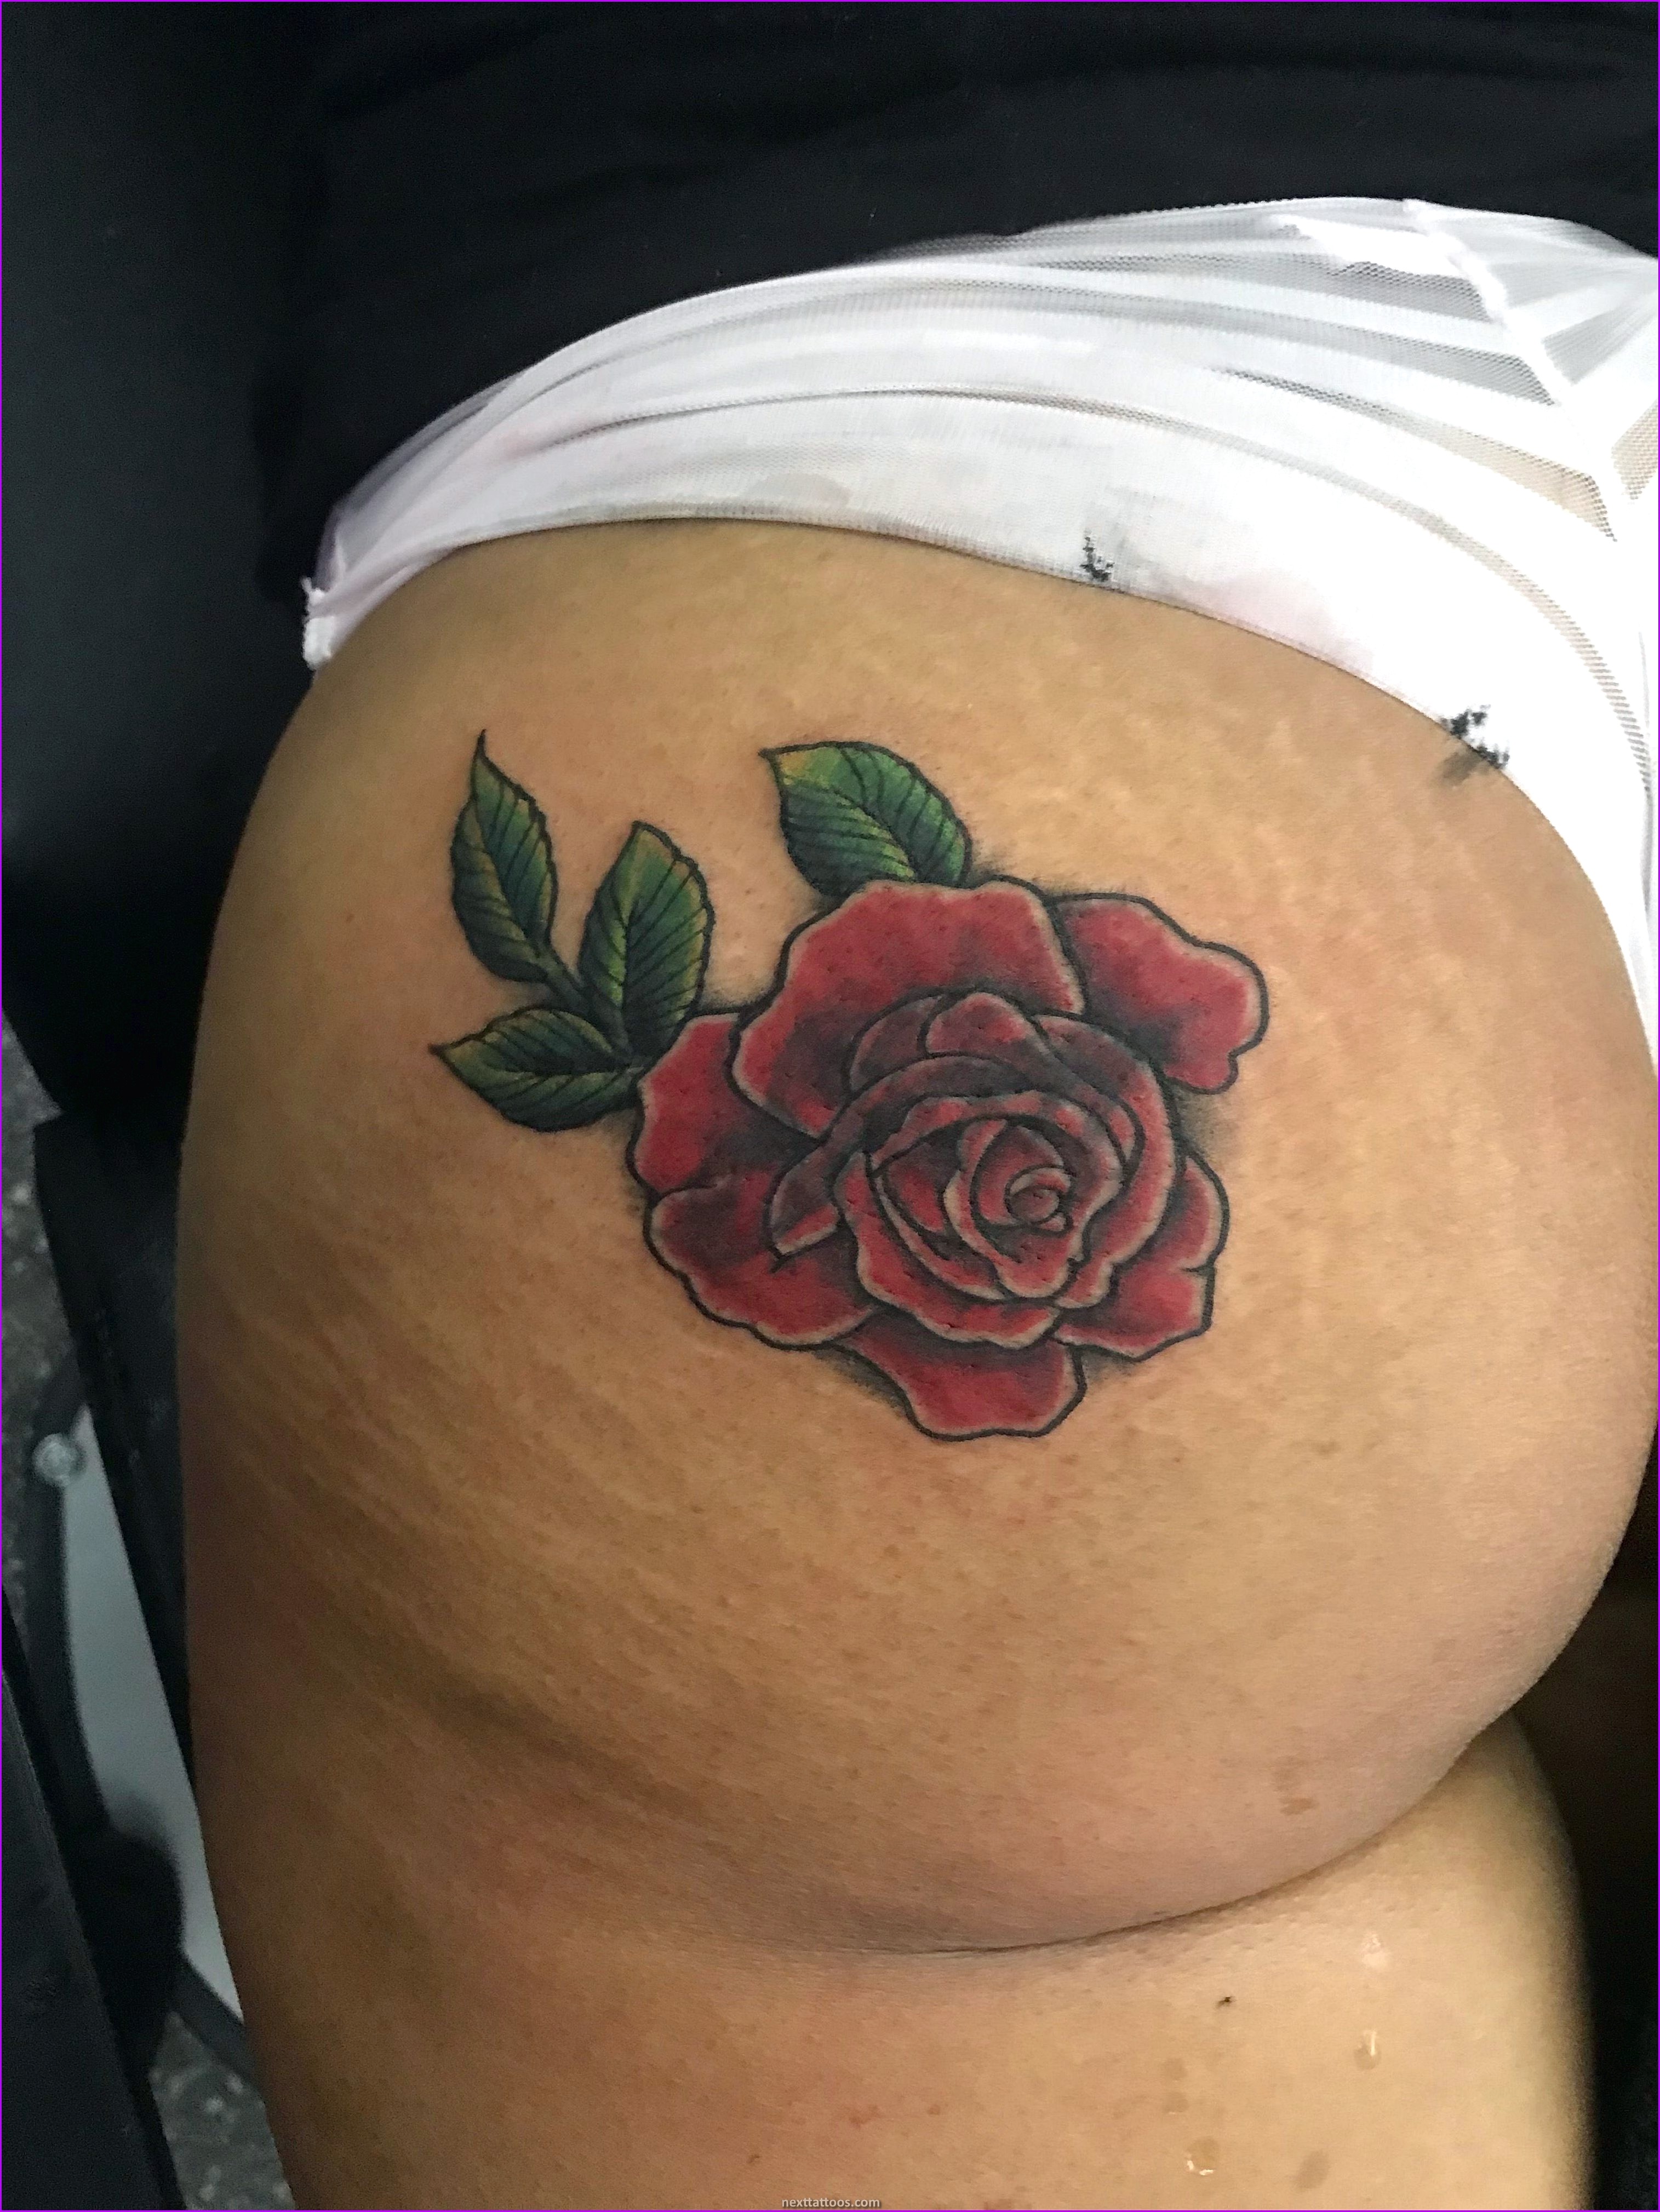 What Are Some of the Most Popular Butt Tattoos?